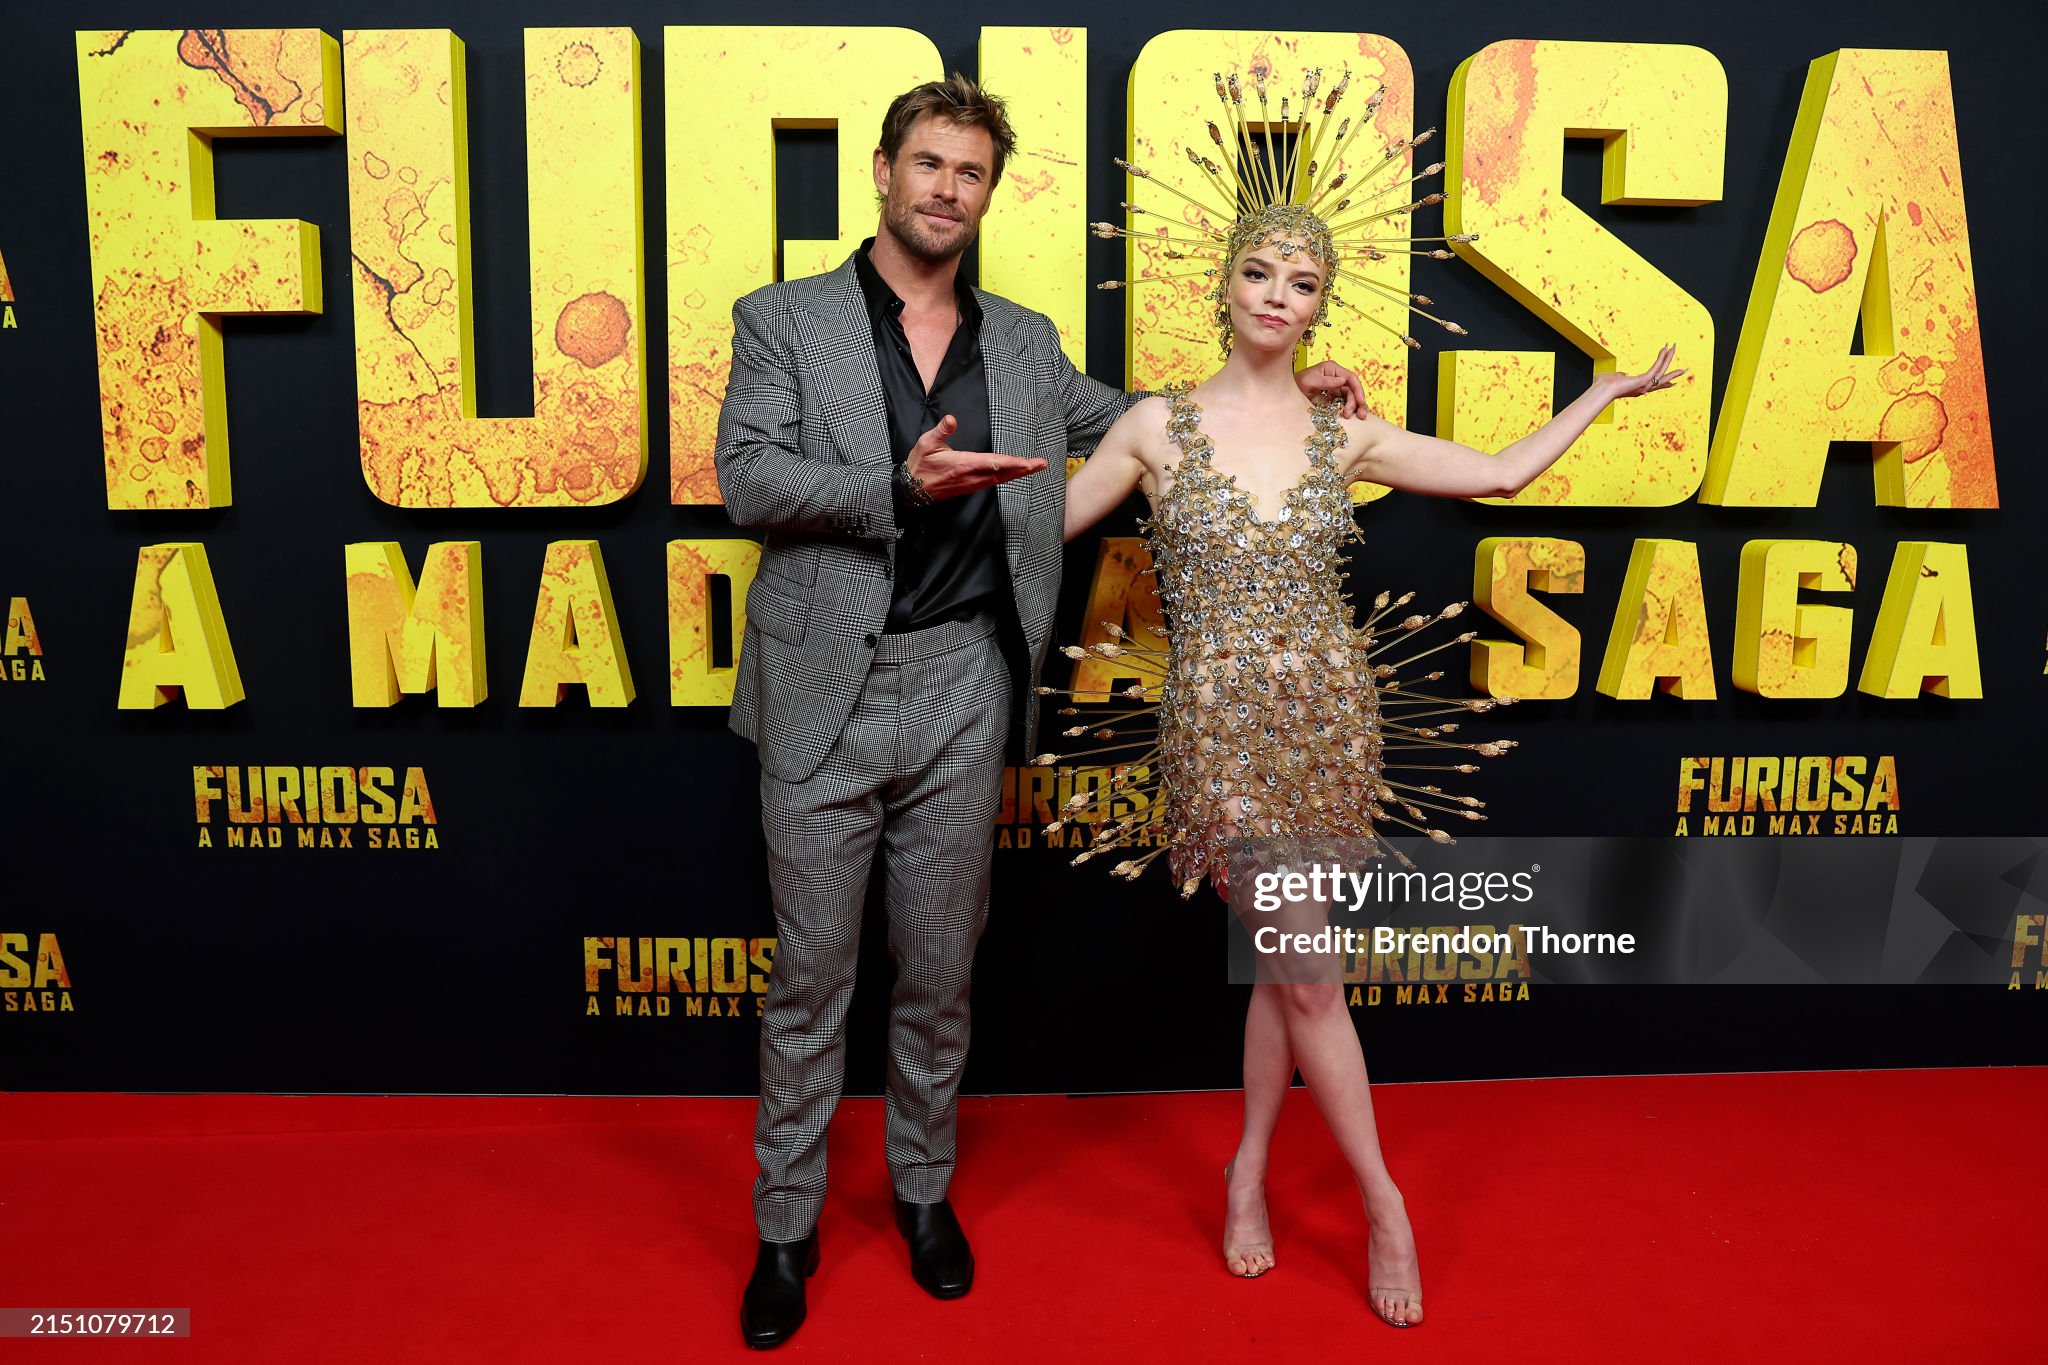 gettyimages-2151079712-2048x2048.jpg